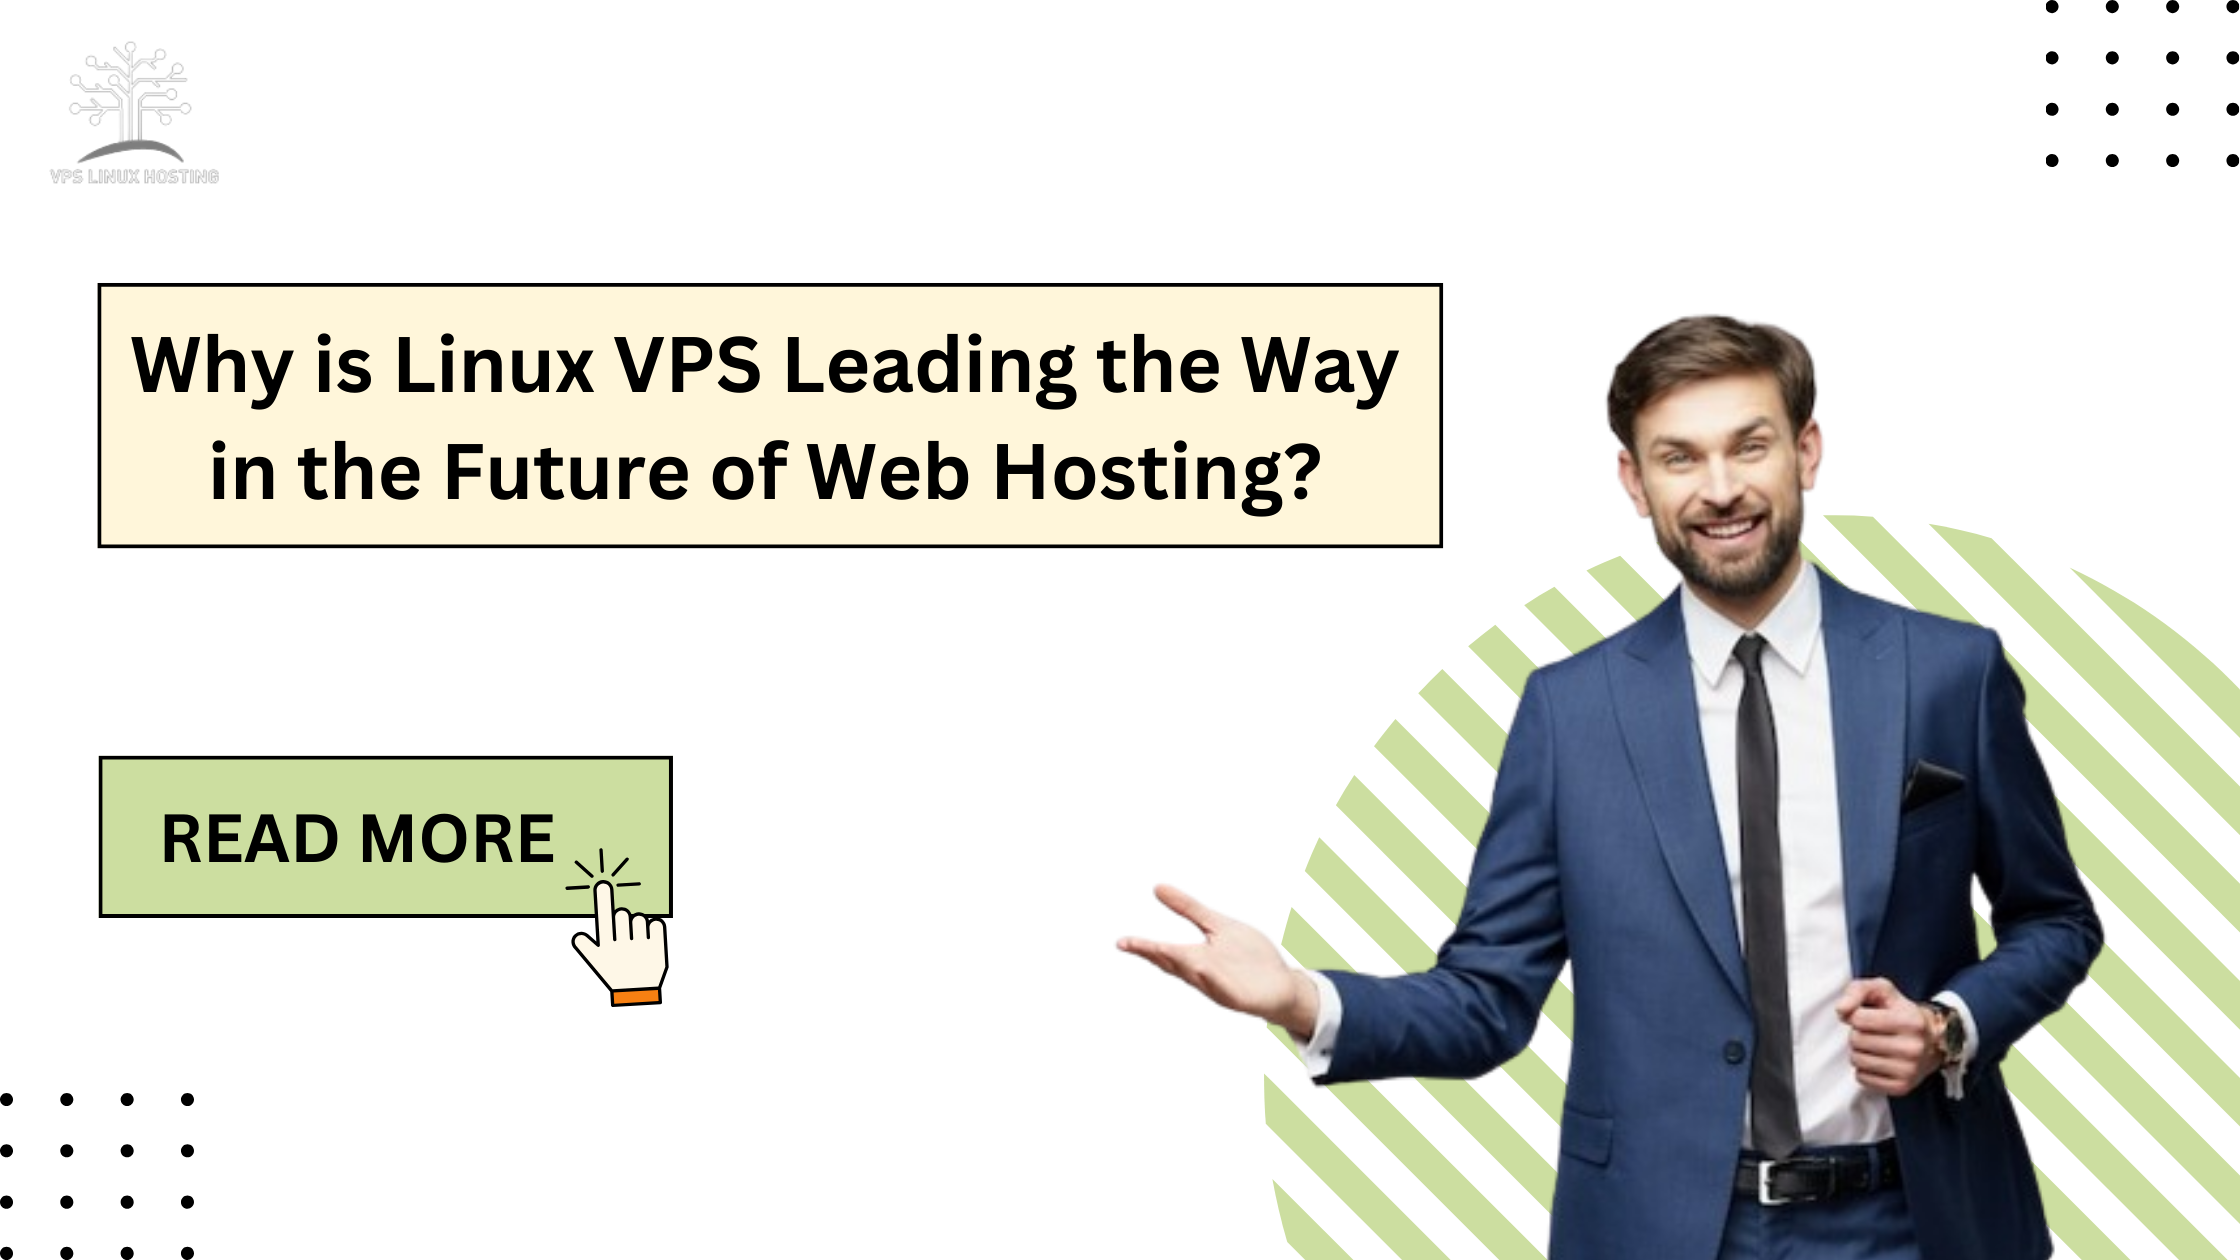 Why is Linux VPS Leading the Way in the Future of Web Hosting